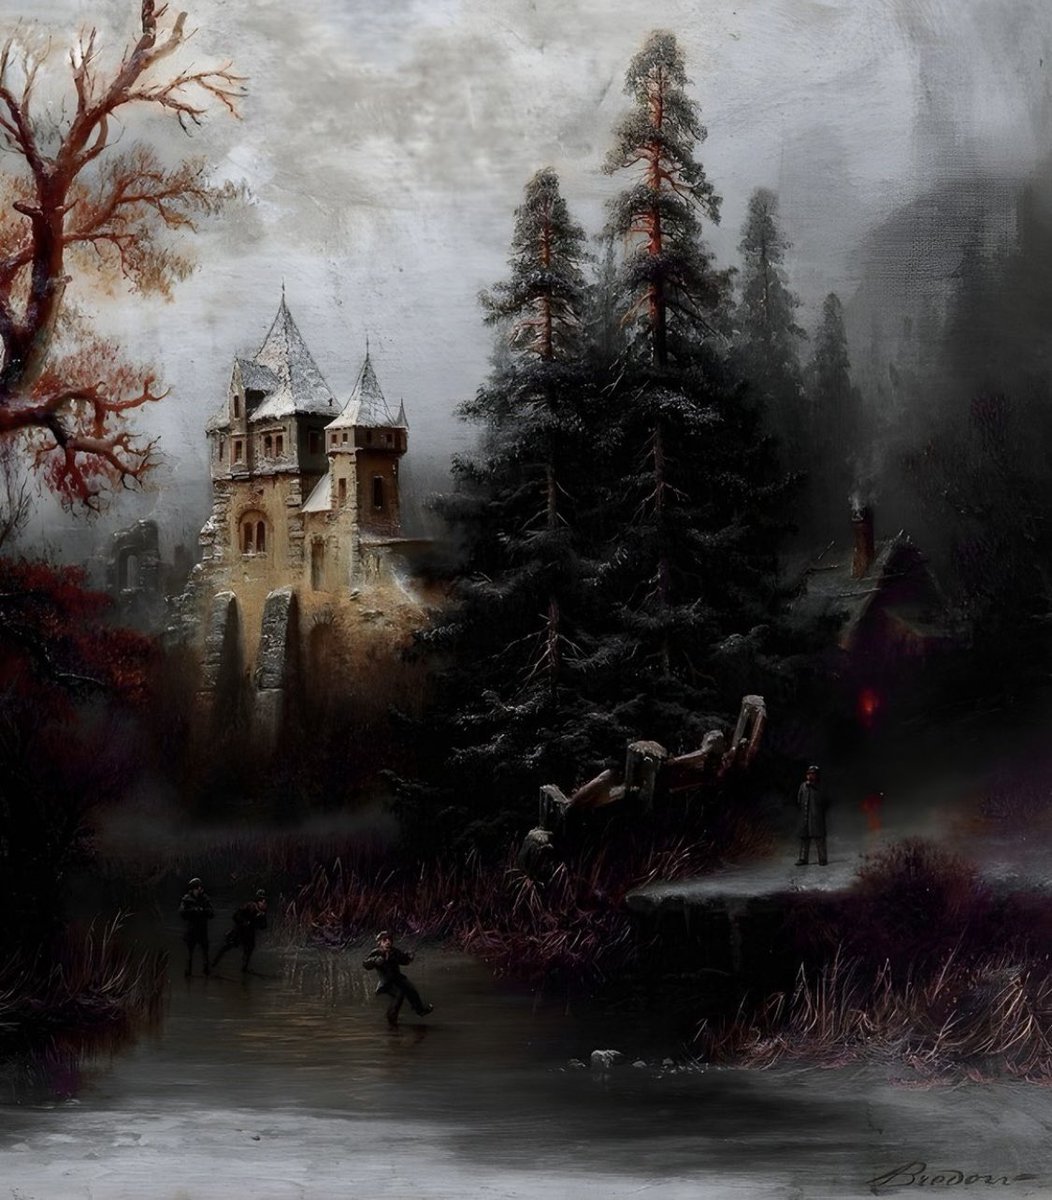 Romantic Winter Landscape with Ice Skaters by a Castle by Albert Bredow (1828-1899)